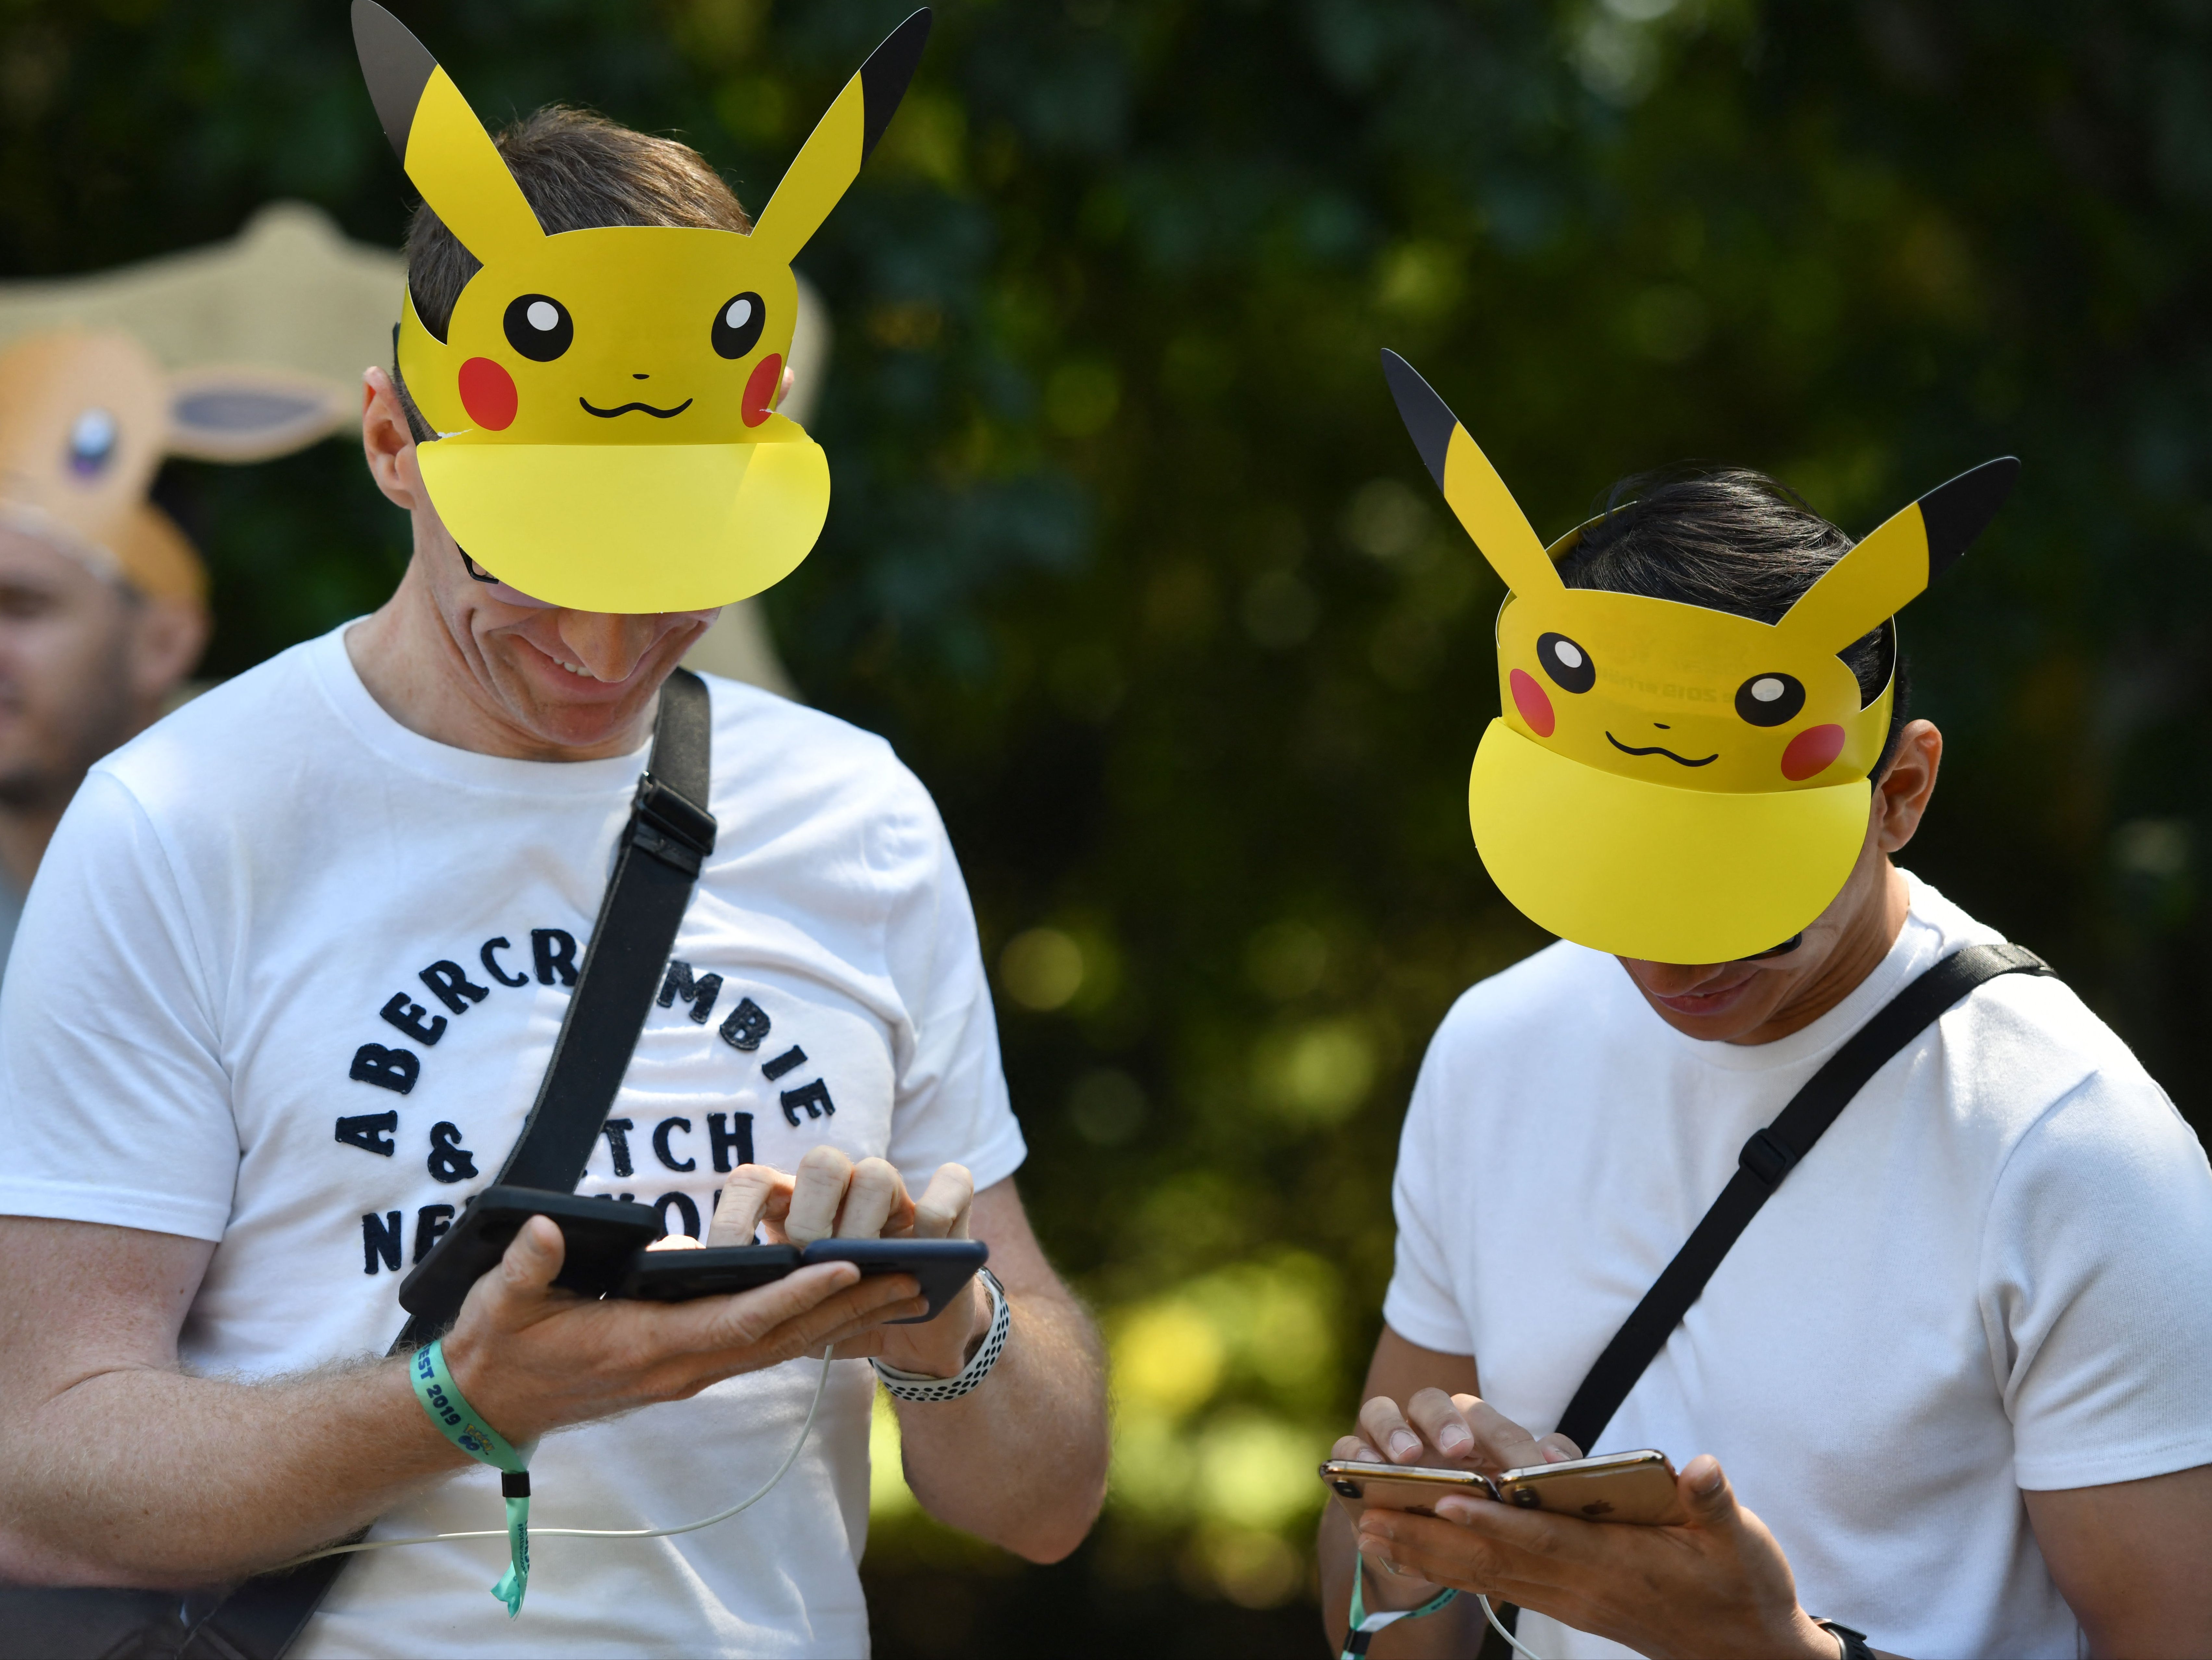 Visitors, with Pokemon caps, look at their phones during the Pokemon Go Festival on 4 July 2019 at the Westfalenpark in Dortmund, western Germany